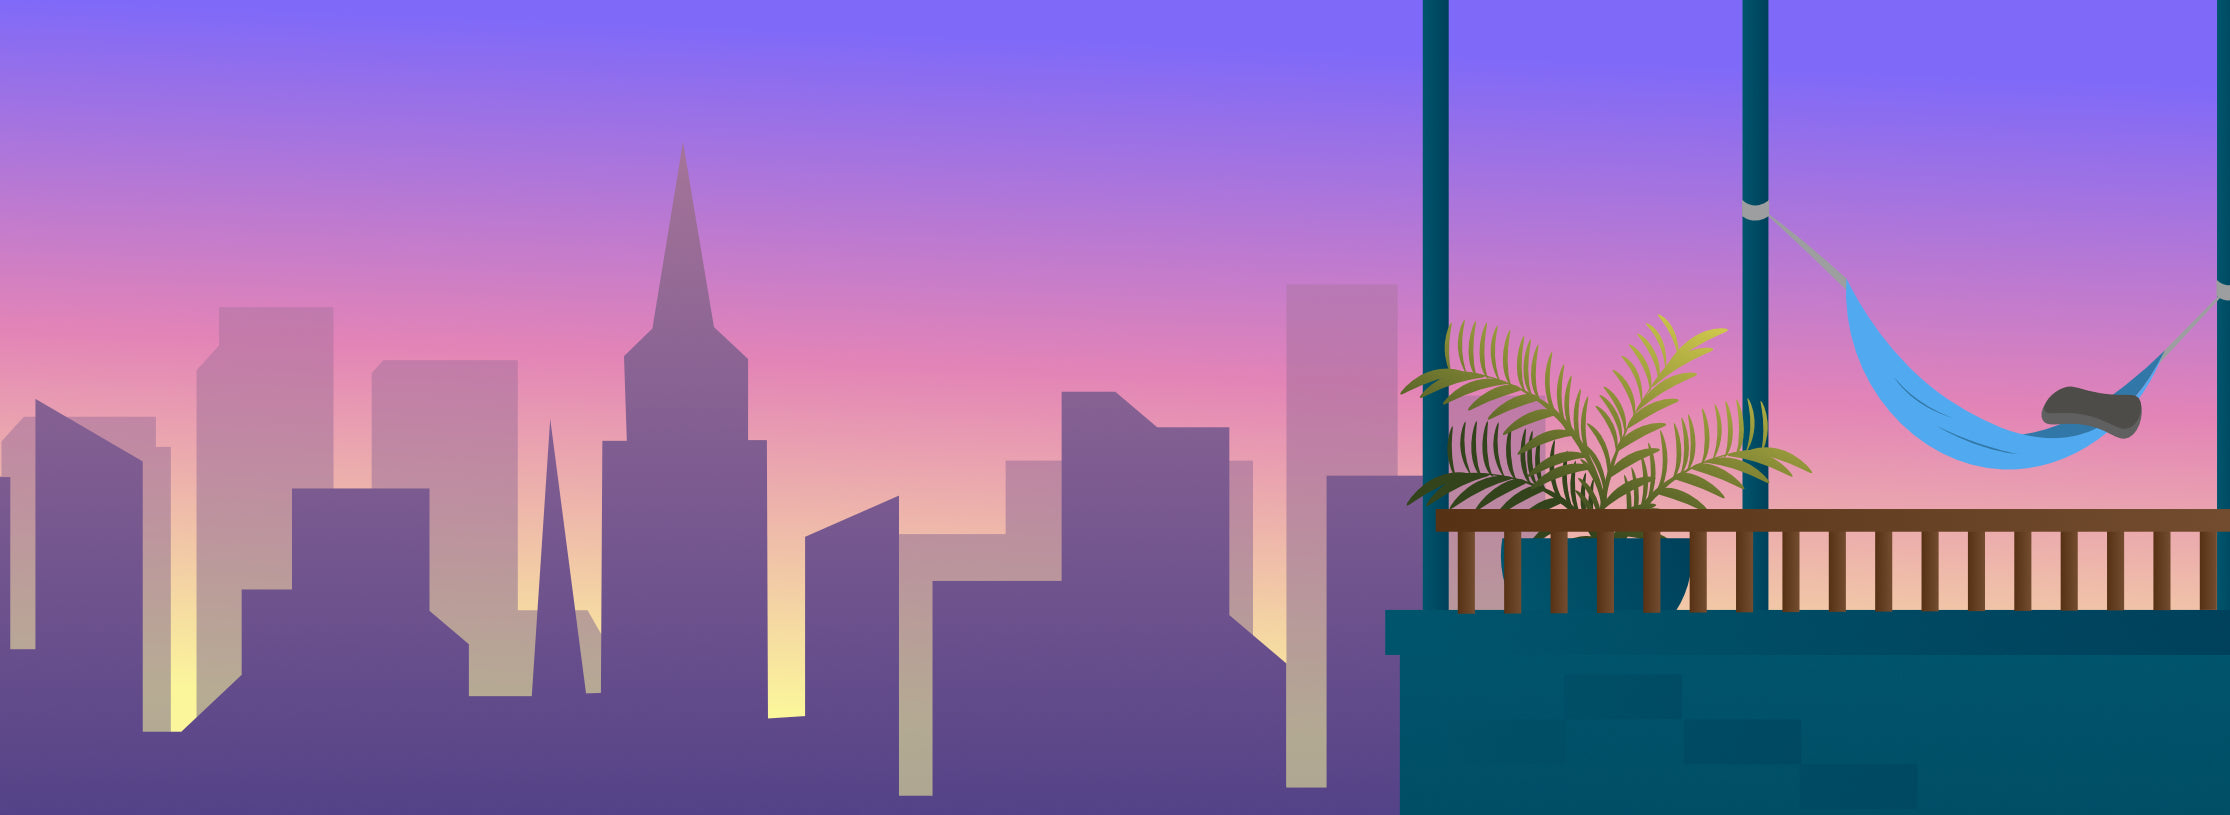 Stylized graphic of a hammock on a rooftop terrace overlooking a city skyline